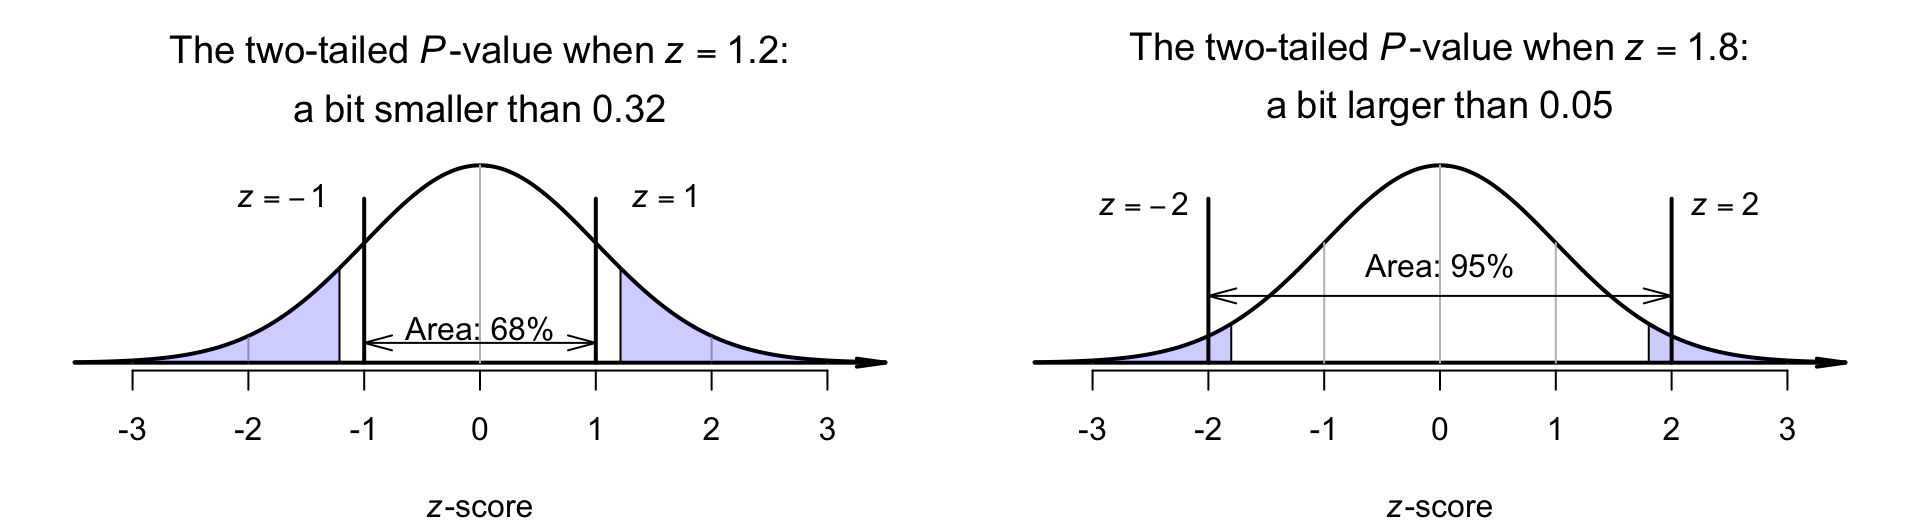 The two-tailed $P$-value is the combined area in the two tails of the distribution. Left panel: when $z = 1.2$ (or $z = -1.2$). Right panel: when $z = 1.8$ (or $z = -1.8$).